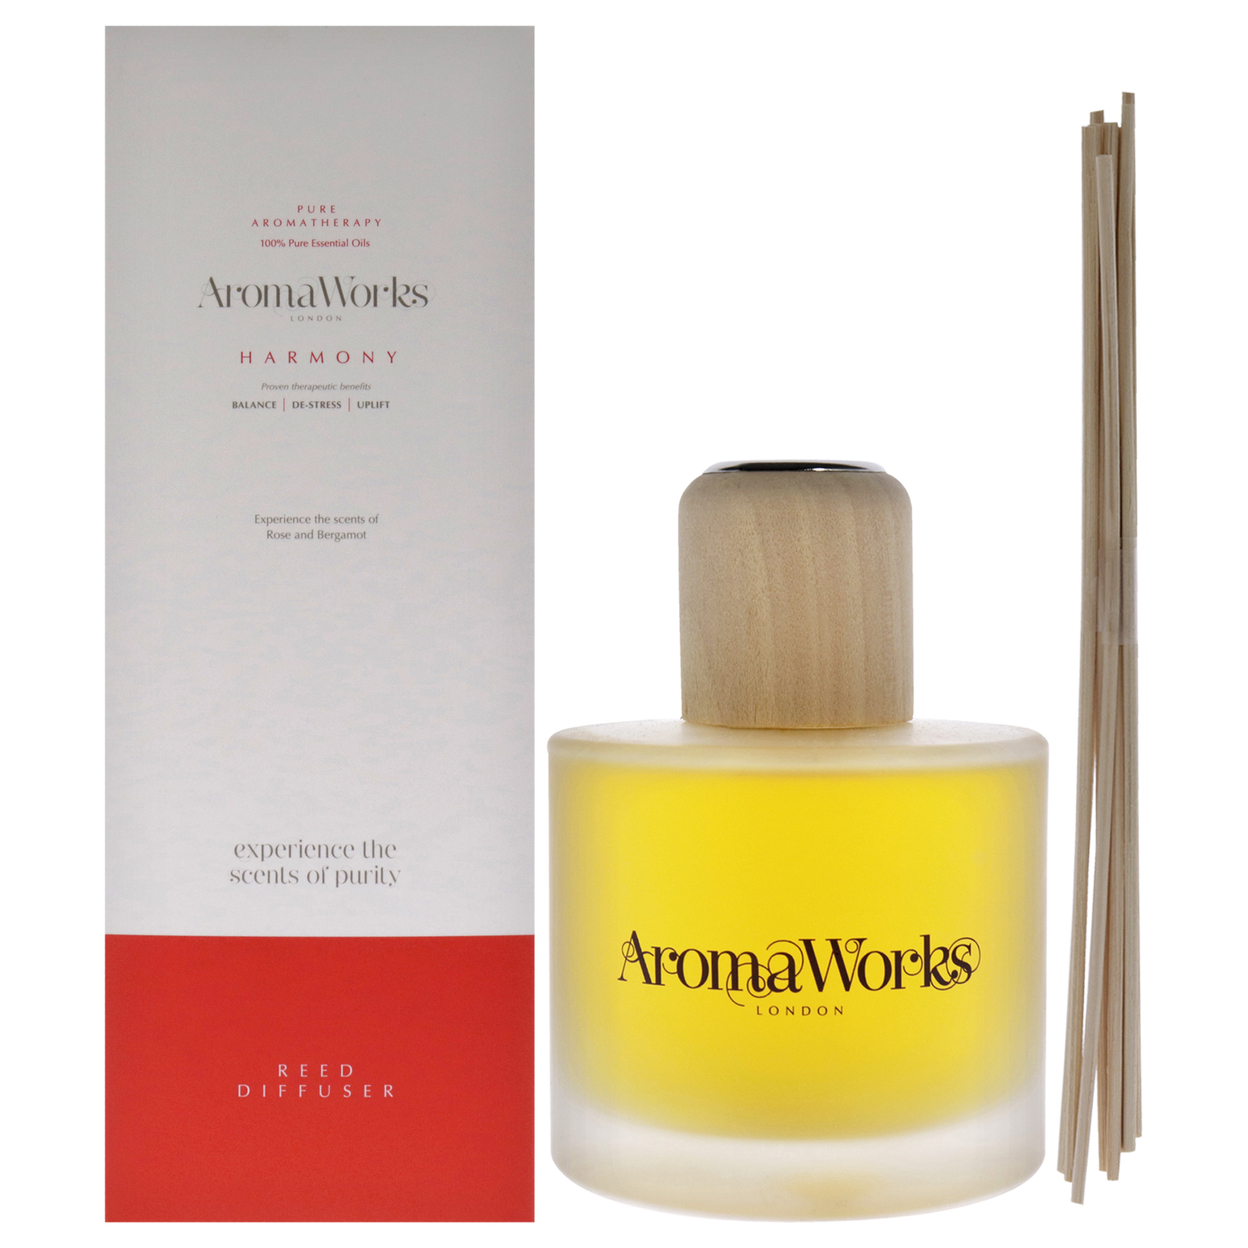 Aromaworks Harmony Reed Diffuser Reed Diffusers 6.76 Oz